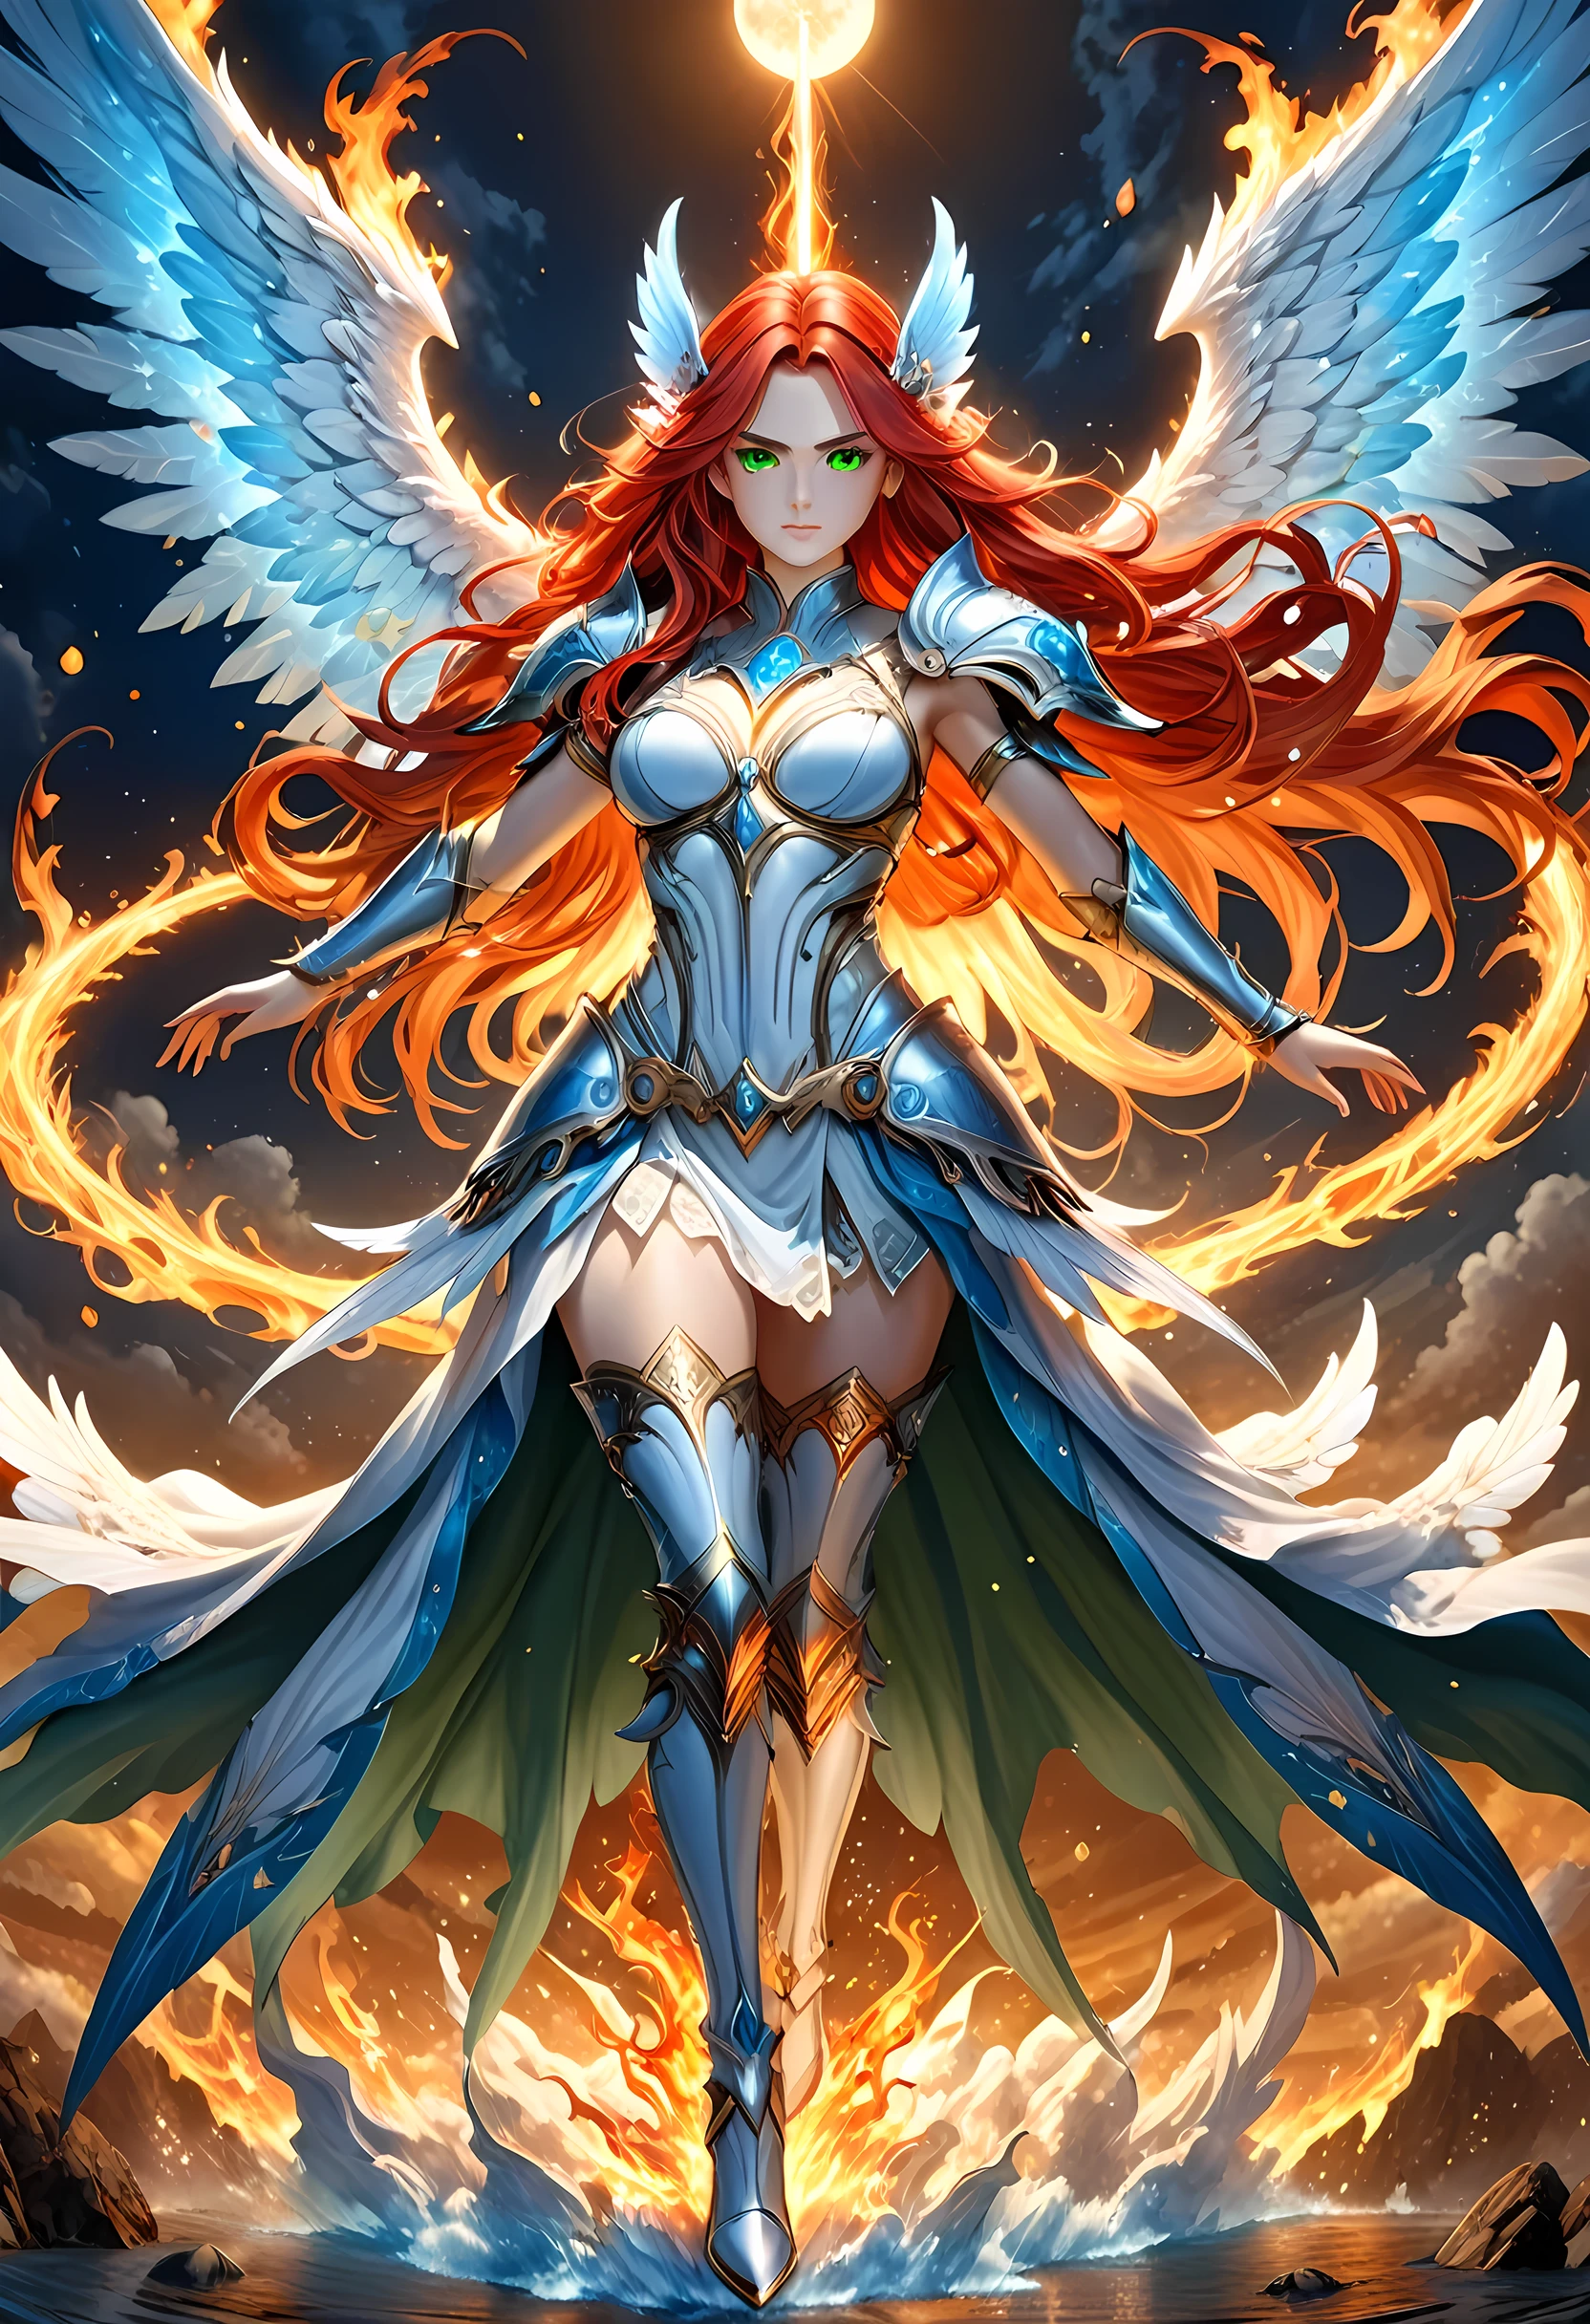 16k, ultra detailed, masterpiece, best quality, (extremely detailed), arafed, dnd art, panoramic view, full body, aasimar, female, (Masterpieceת intense details:1.3), female, sorceress, casting flaming spell(Masterpieceת intense details:1.3) large angelic wings, (azure: 1.3) angelic wings spread (Masterpieceת intense details:1.3), fantasy magical heaven background (Masterpieceת intense details:1.3), moon, stars, clouds, wearing white armor (Masterpieceת intense details:1.3), high heeled boots (Masterpieceת intense details:1.3), armed with staff, (red hair: 1.4), (green eyes: 1.4), intense eyes, ultra feminine, ultra detailed face, (Masterpieceת intense details:1.5), (anatomically correct: 1.5), determined face, divine light, cinematic lighting, soft light, silhouette, photorealism, panoramic view ((Masterpieceת intense details:1.3) , Wide-Angle, Ultra-Wide Angle, 16k, highres, best quality, faize, 3D rendering